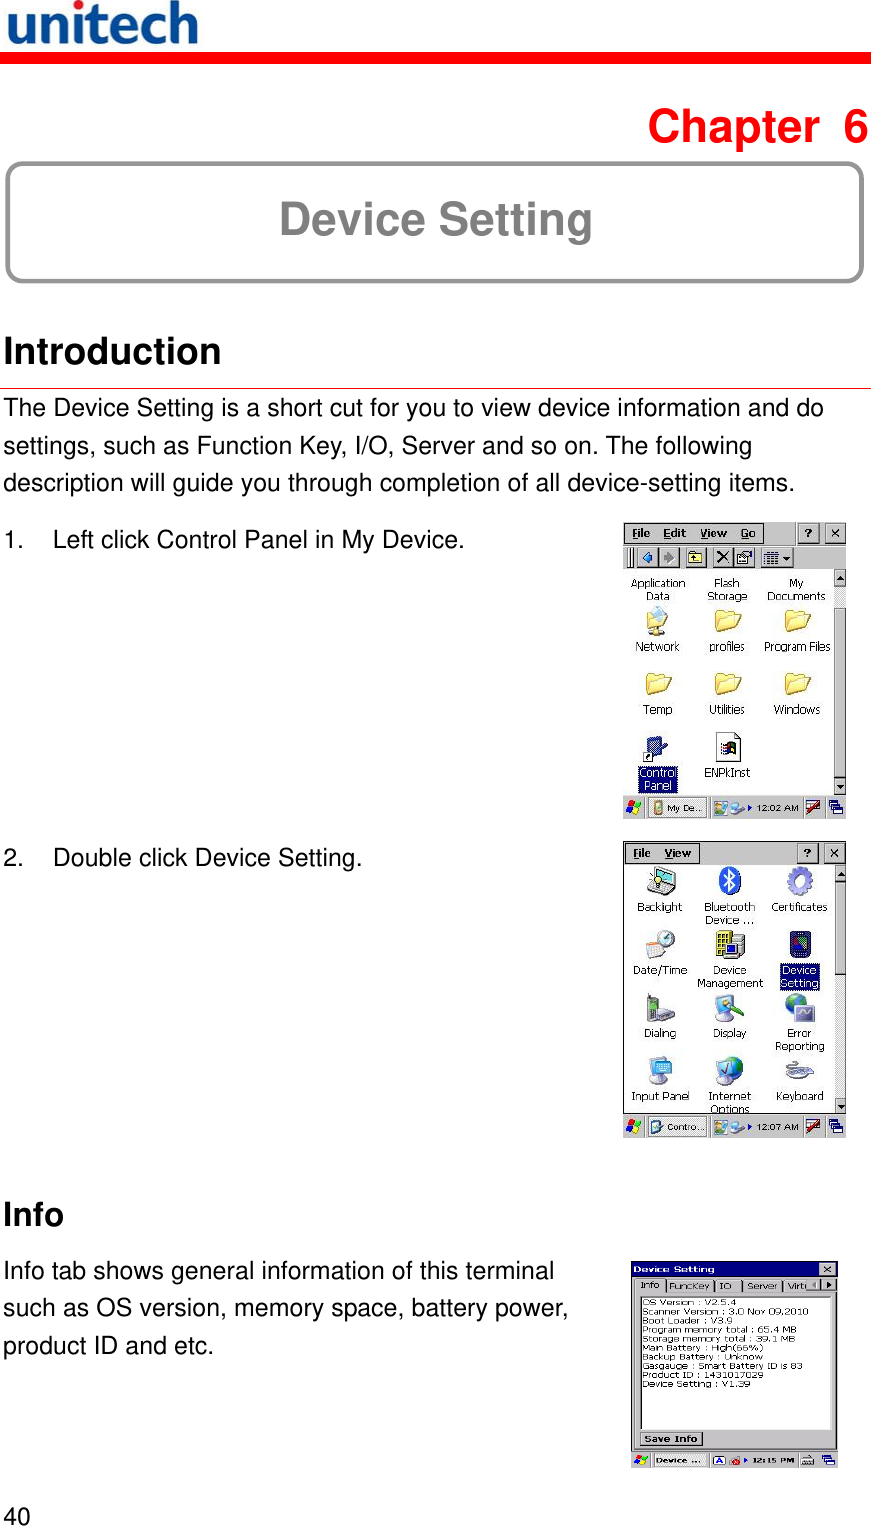   40  Chapter 6  Device Setting  Introduction The Device Setting is a short cut for you to view device information and do settings, such as Function Key, I/O, Server and so on. The following description will guide you through completion of all device-setting items.     1.  Left click Control Panel in My Device.  2.  Double click Device Setting.  Info Info tab shows general information of this terminal such as OS version, memory space, battery power, product ID and etc.  